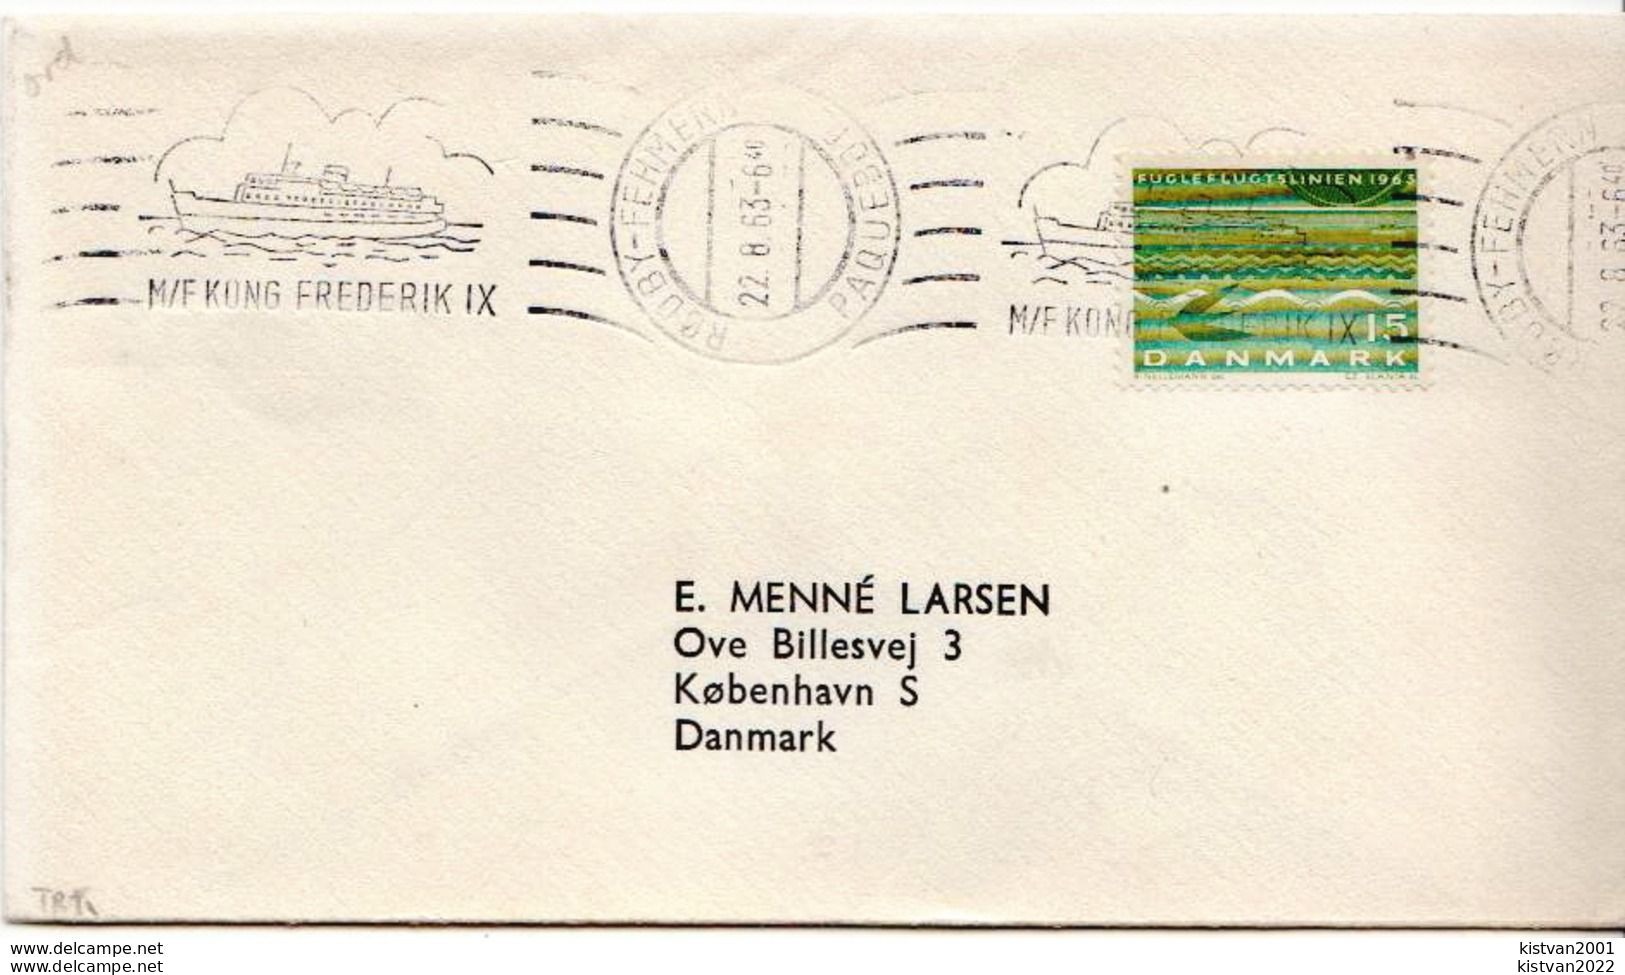 Postal History Cover: Denmark Cover With M/F KONG FREDERIK IX Ship Cancel - Covers & Documents